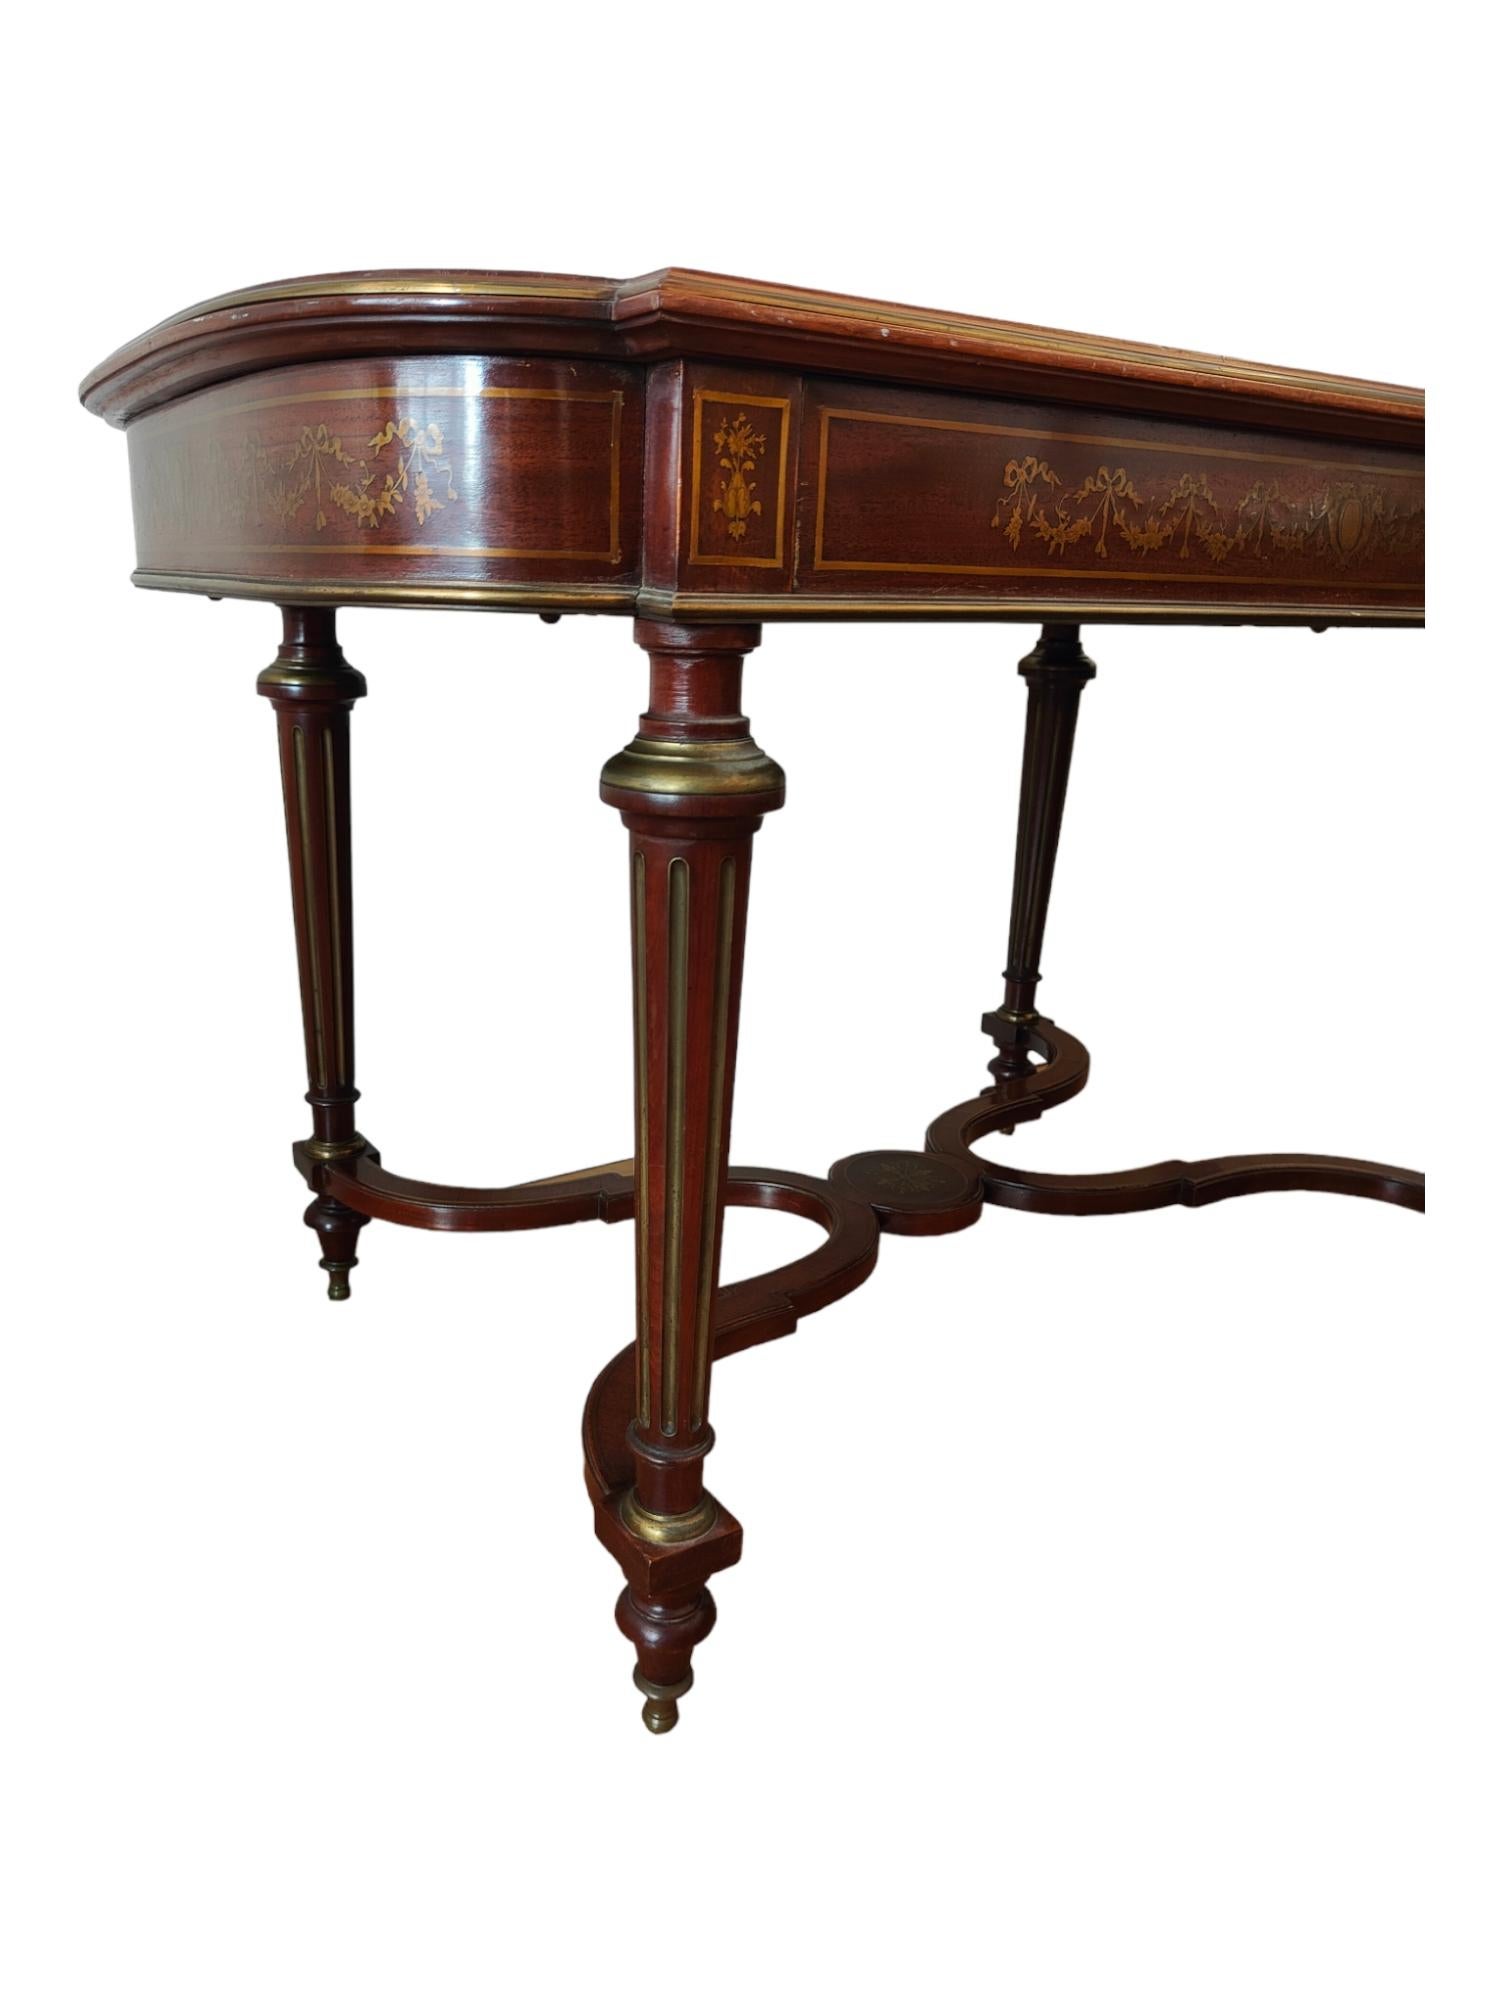 Elegant French Table with Marquetry from the 19th Century 6